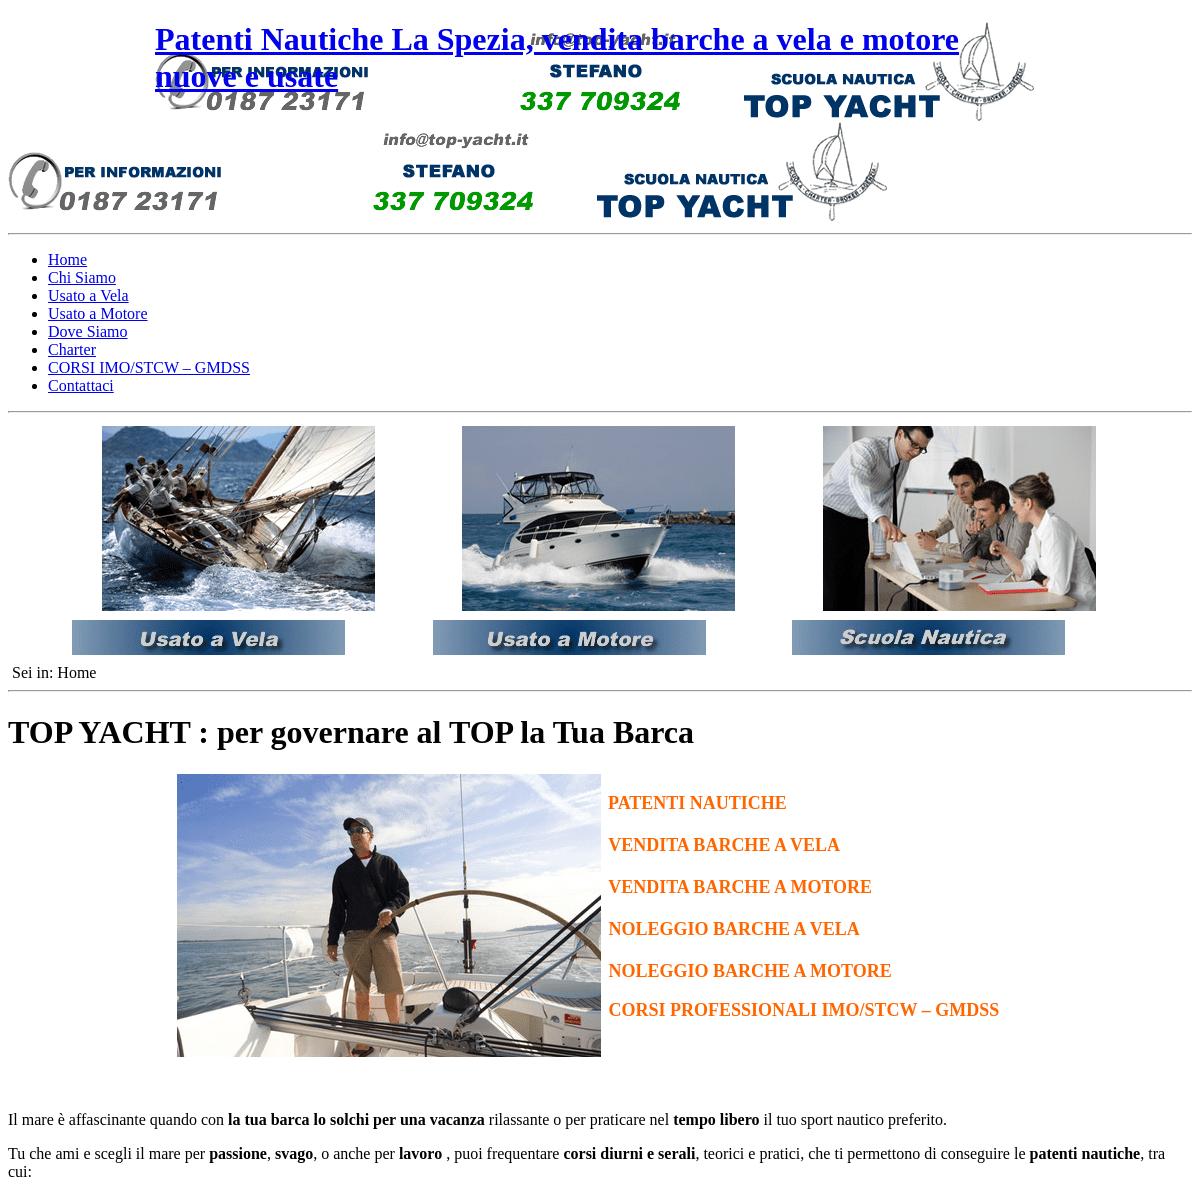 A complete backup of https://top-yacht.it